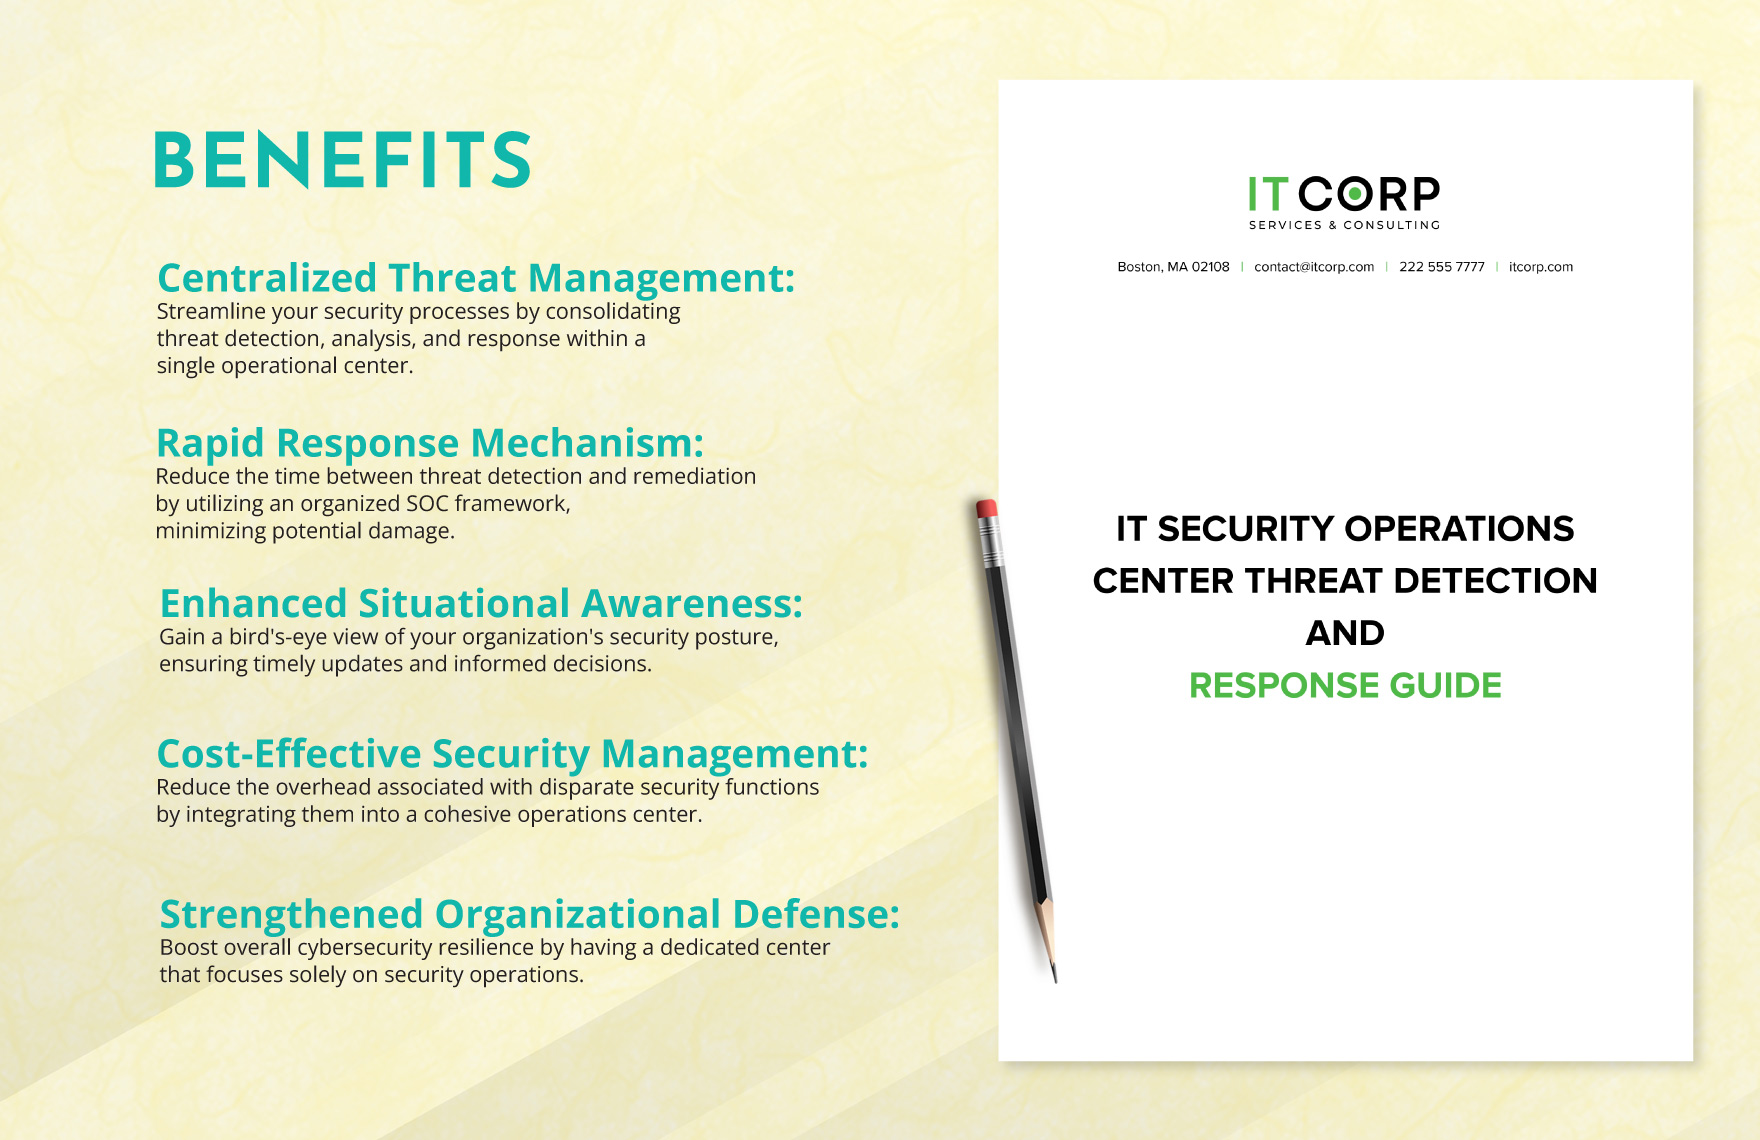 IT Security Operations Center Threat Detection and Response Guide Template